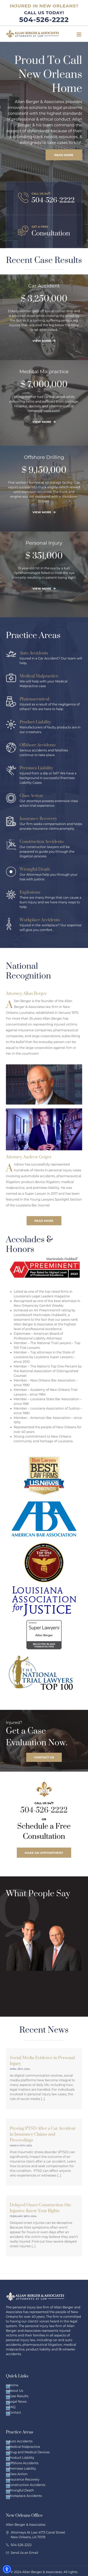 Allan Berger & Associates Attorneys at Law - New Orleans LA Lawyers